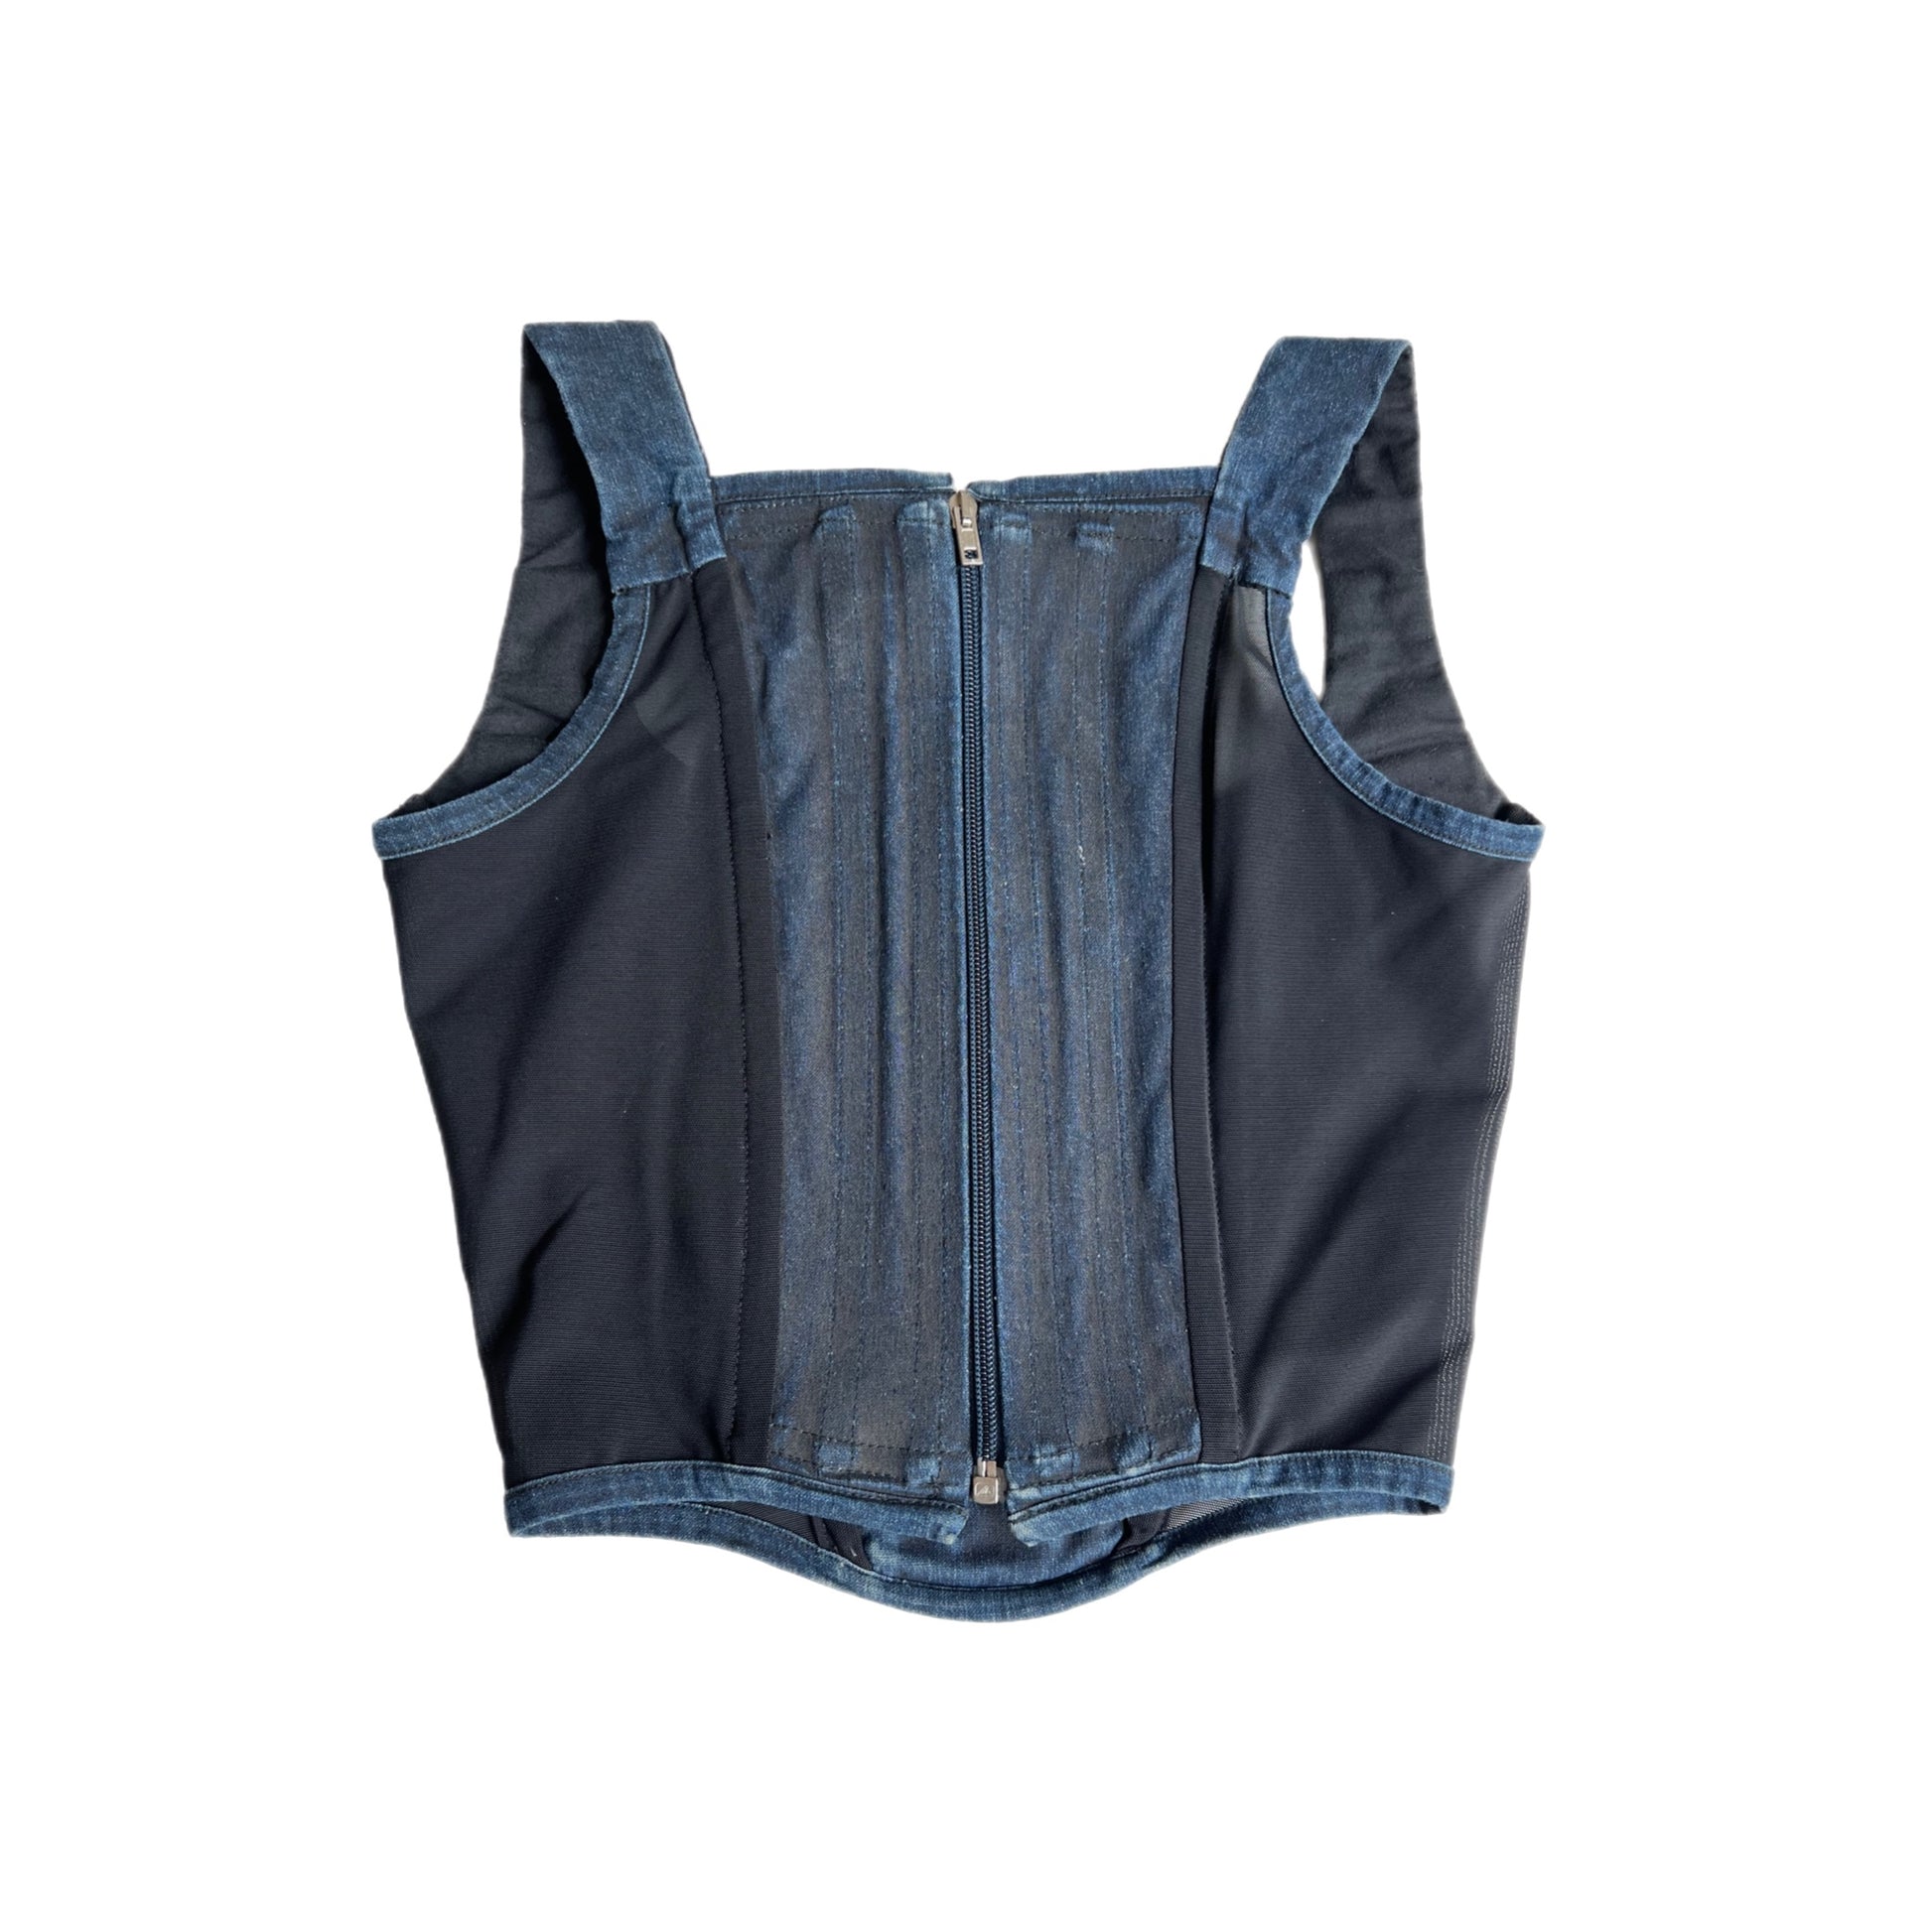 "Define your style with Vivienne Westwood Anglomania Corset Top. Embrace edgy and chic fashion with this iconic and flattering piece